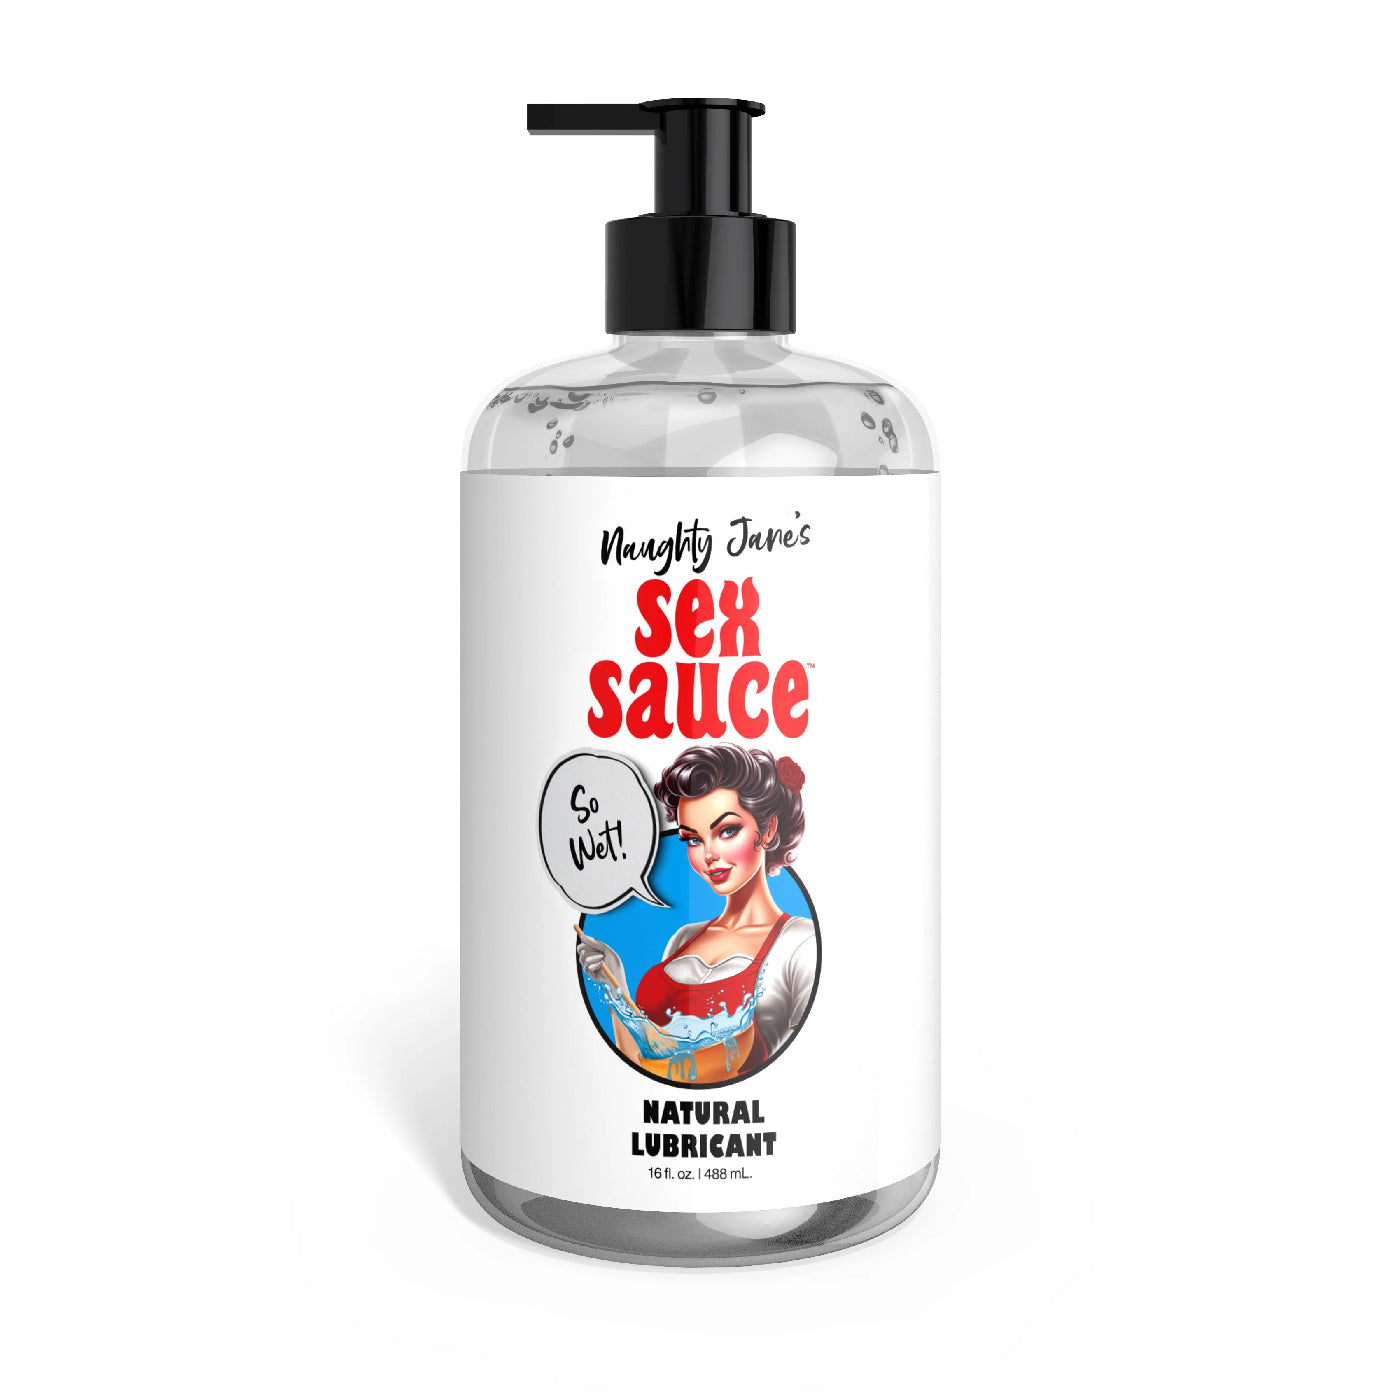 Naughty Jane's Sex Sauce Natural Lubricant 16oz-3